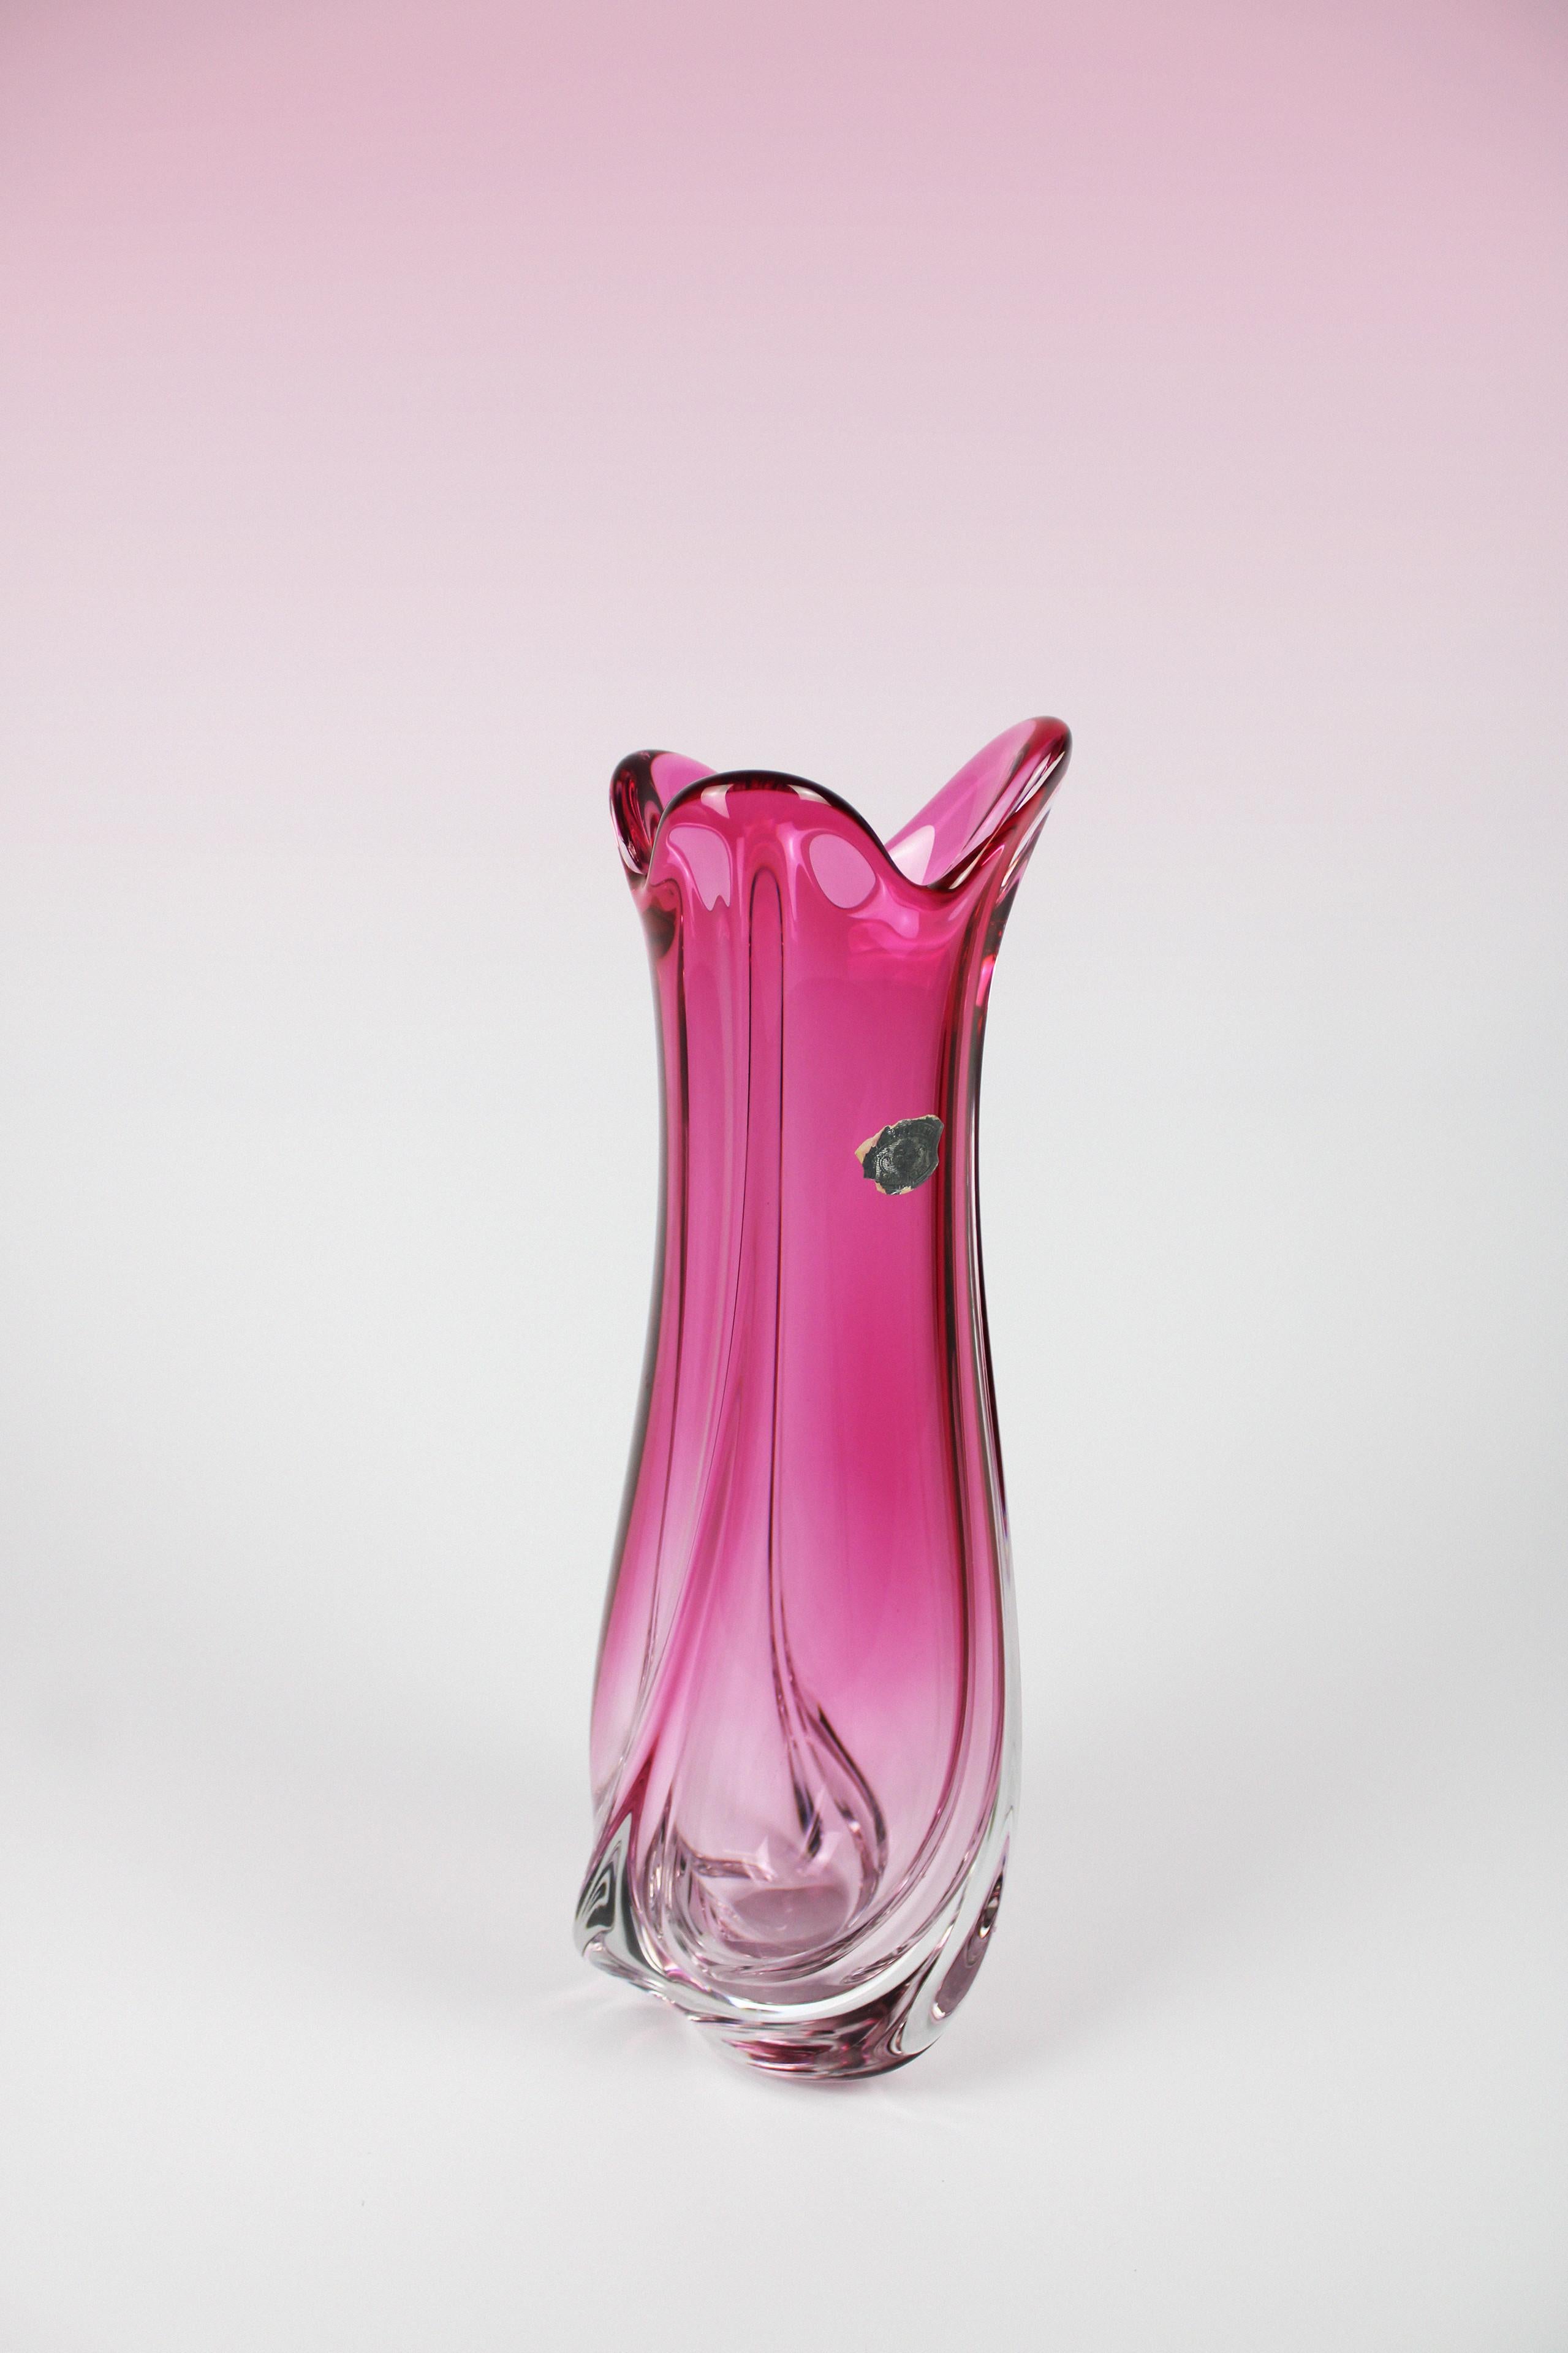 This crystal vase by Val St. Lambert, a Belgian manufacture known for their glassware, is a special piece to have in your home. It is a large vase with an organic shape and immediately stands out with its pink color. It is an original piece that is